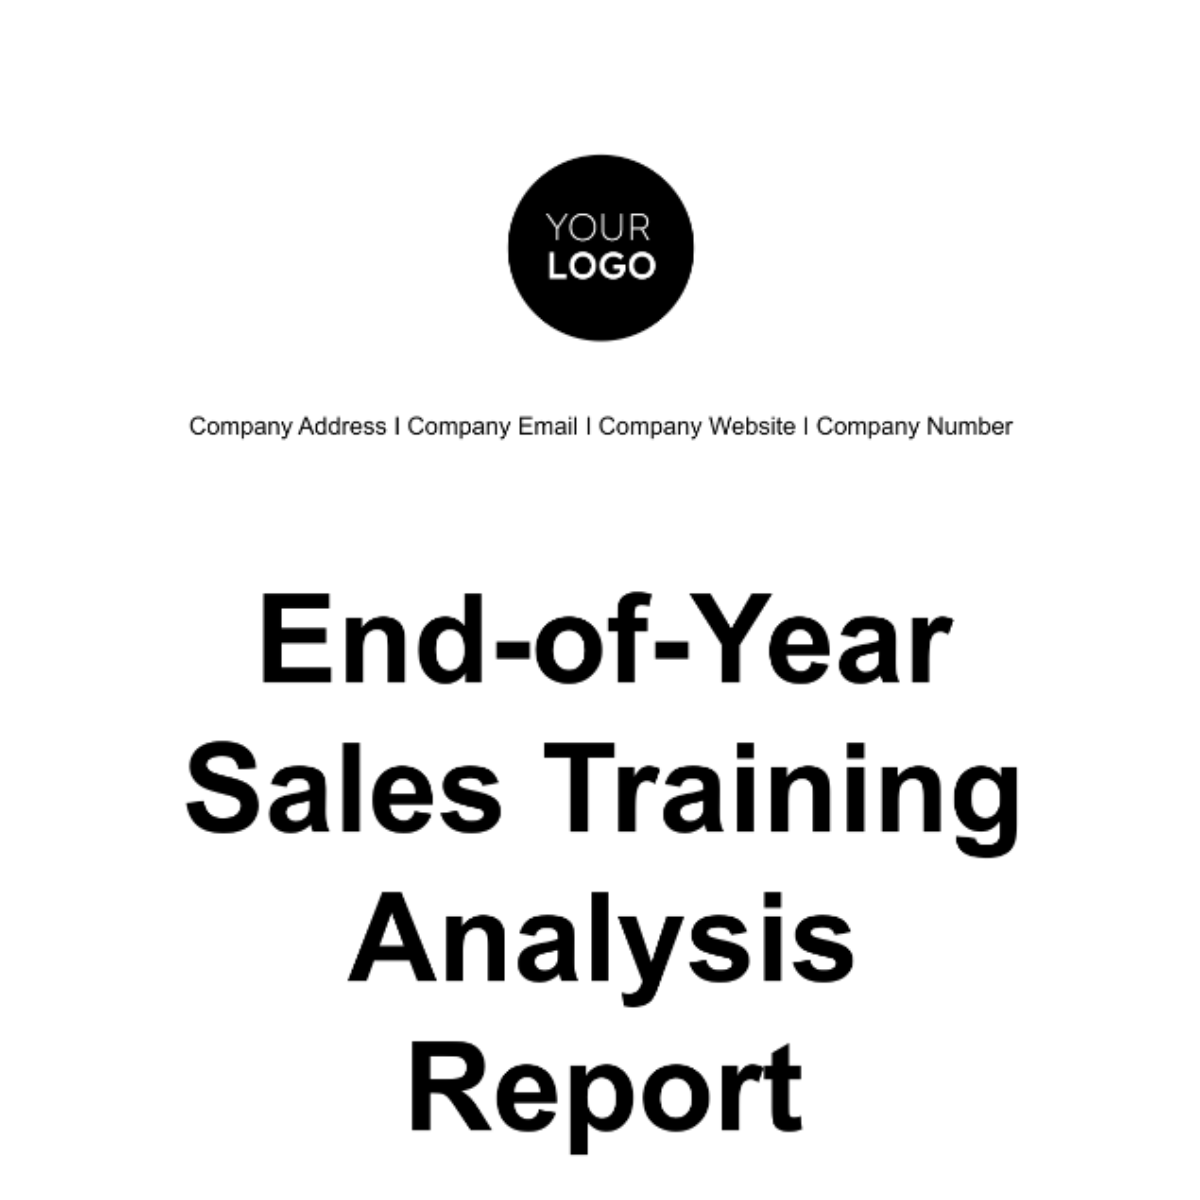 Free End-of-Year Sales Training Analysis Report Template